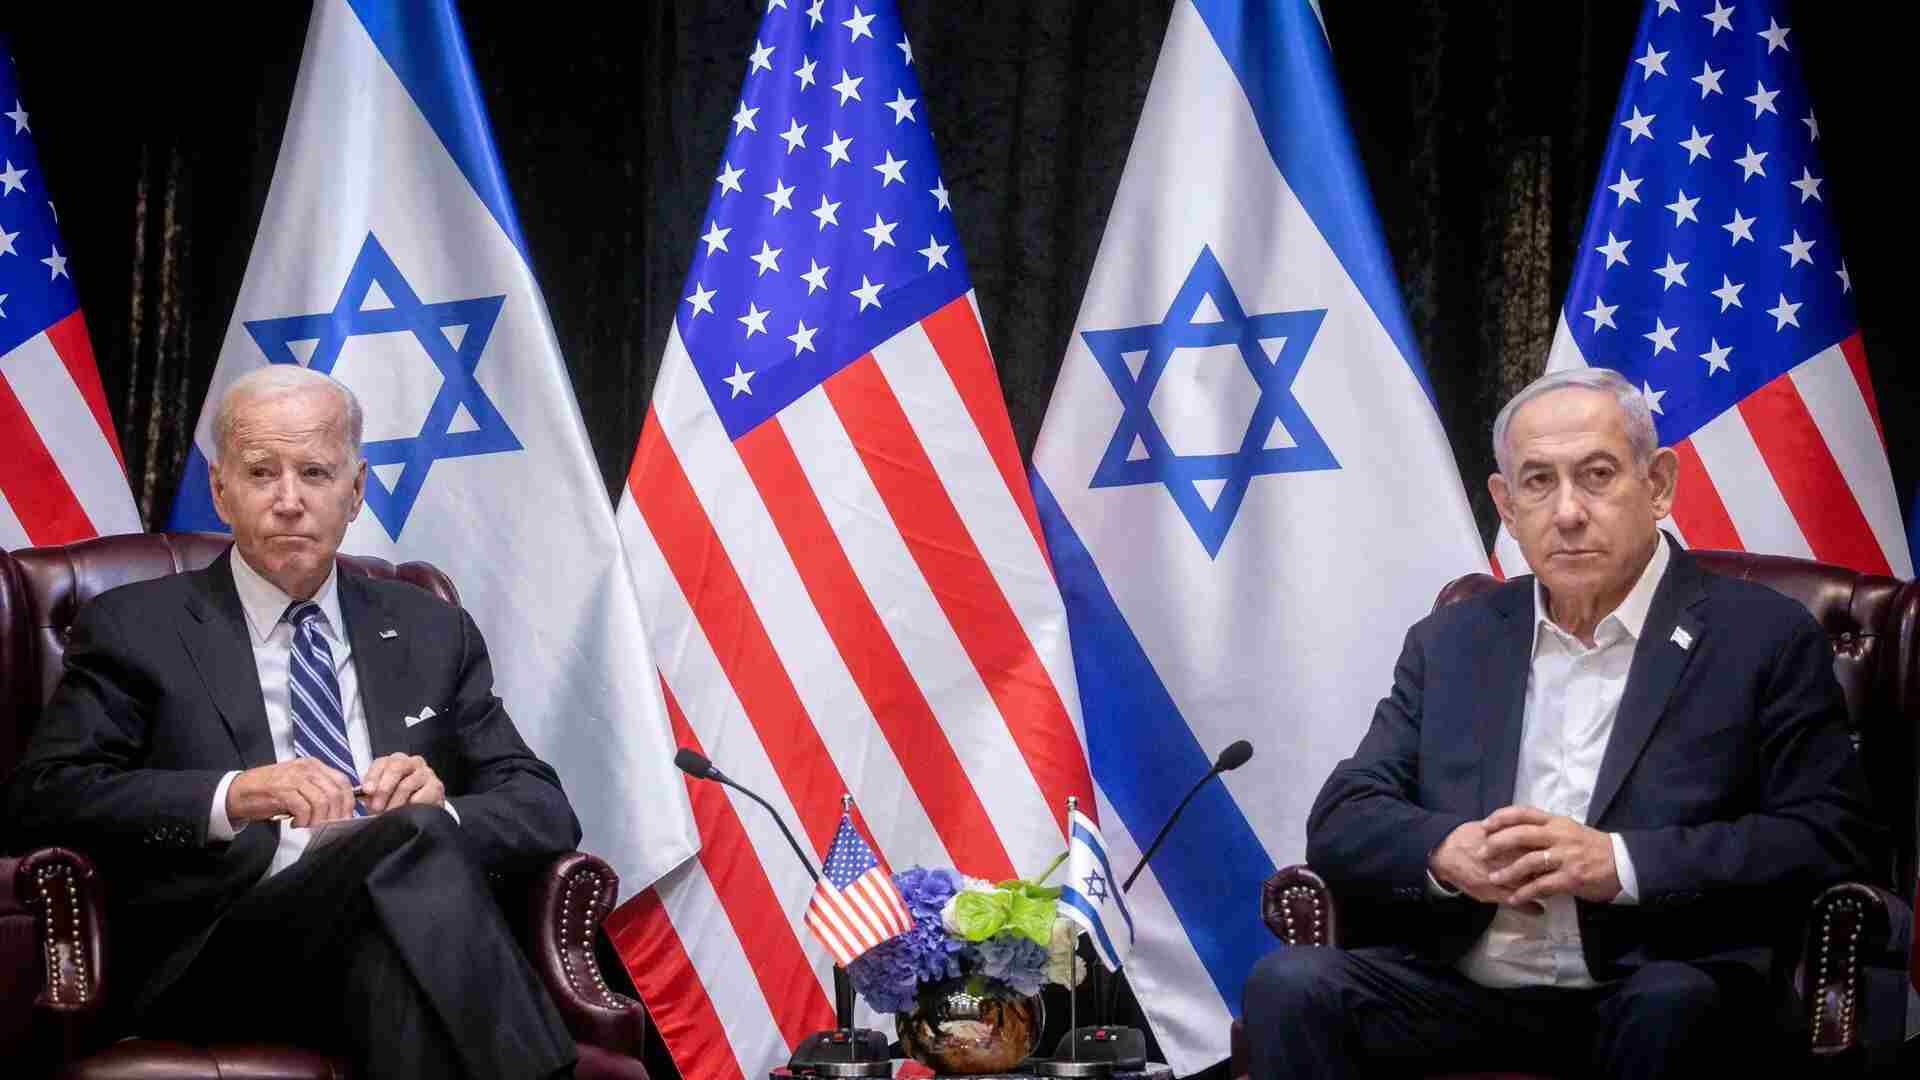 White House Rejects Netanyahu’s Weapons Delay Claims, Cancels US Talks